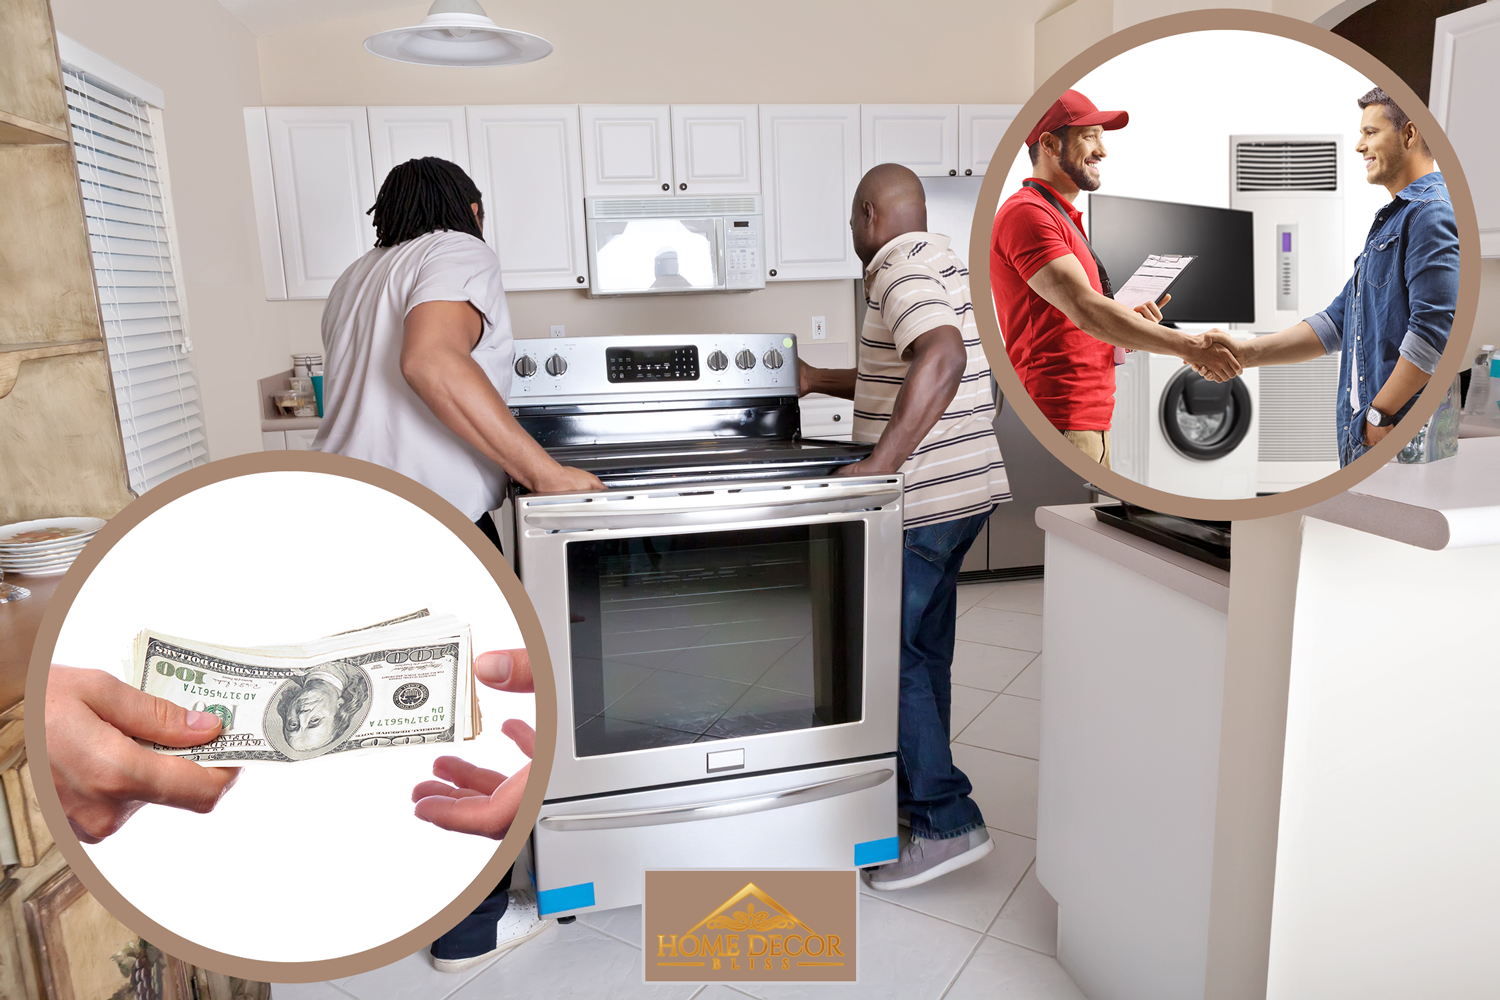 Two delivery men installing an oven - Should You Tip Appliance Delivery And Installation